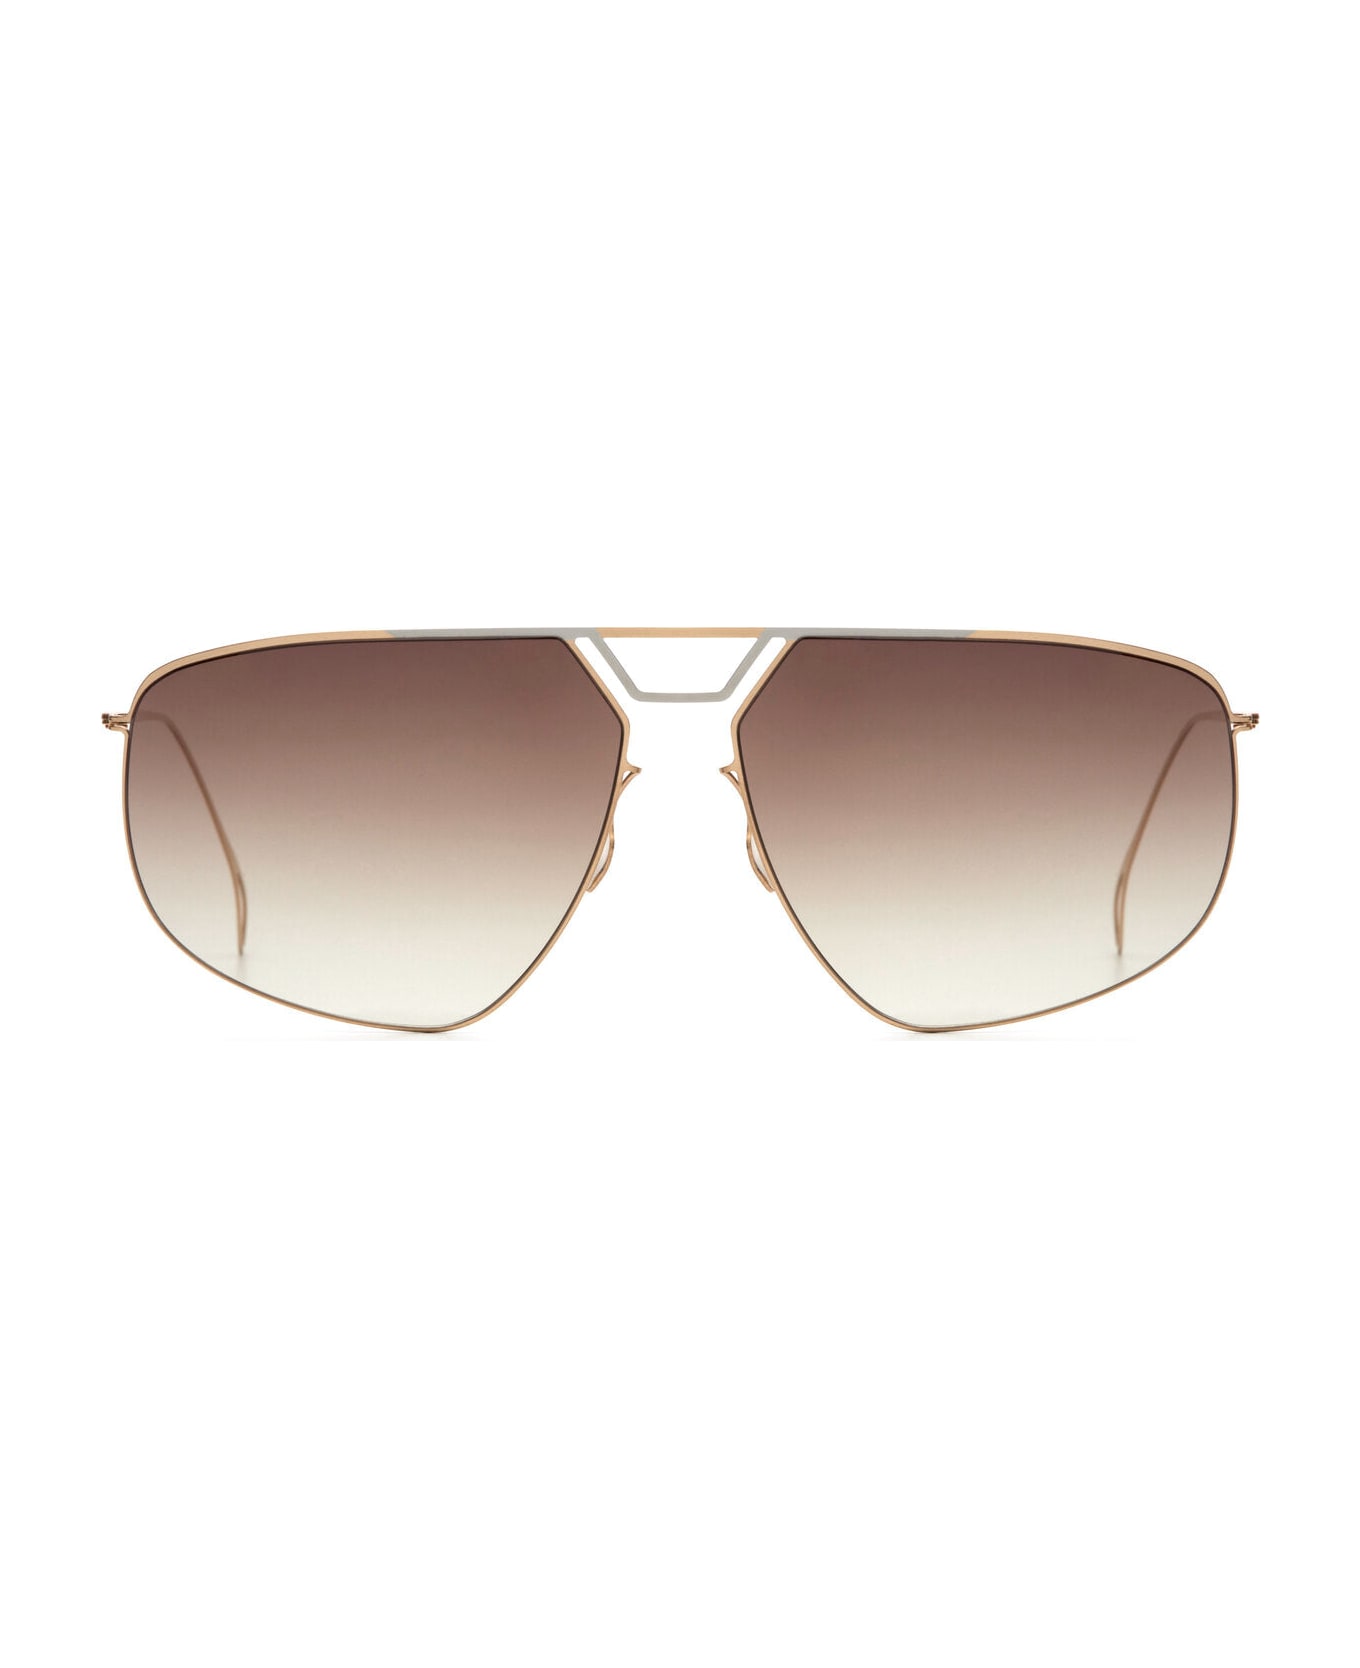 Haffmans & Neumeister North 041 Sunglasses Sunglasses - gold / silver